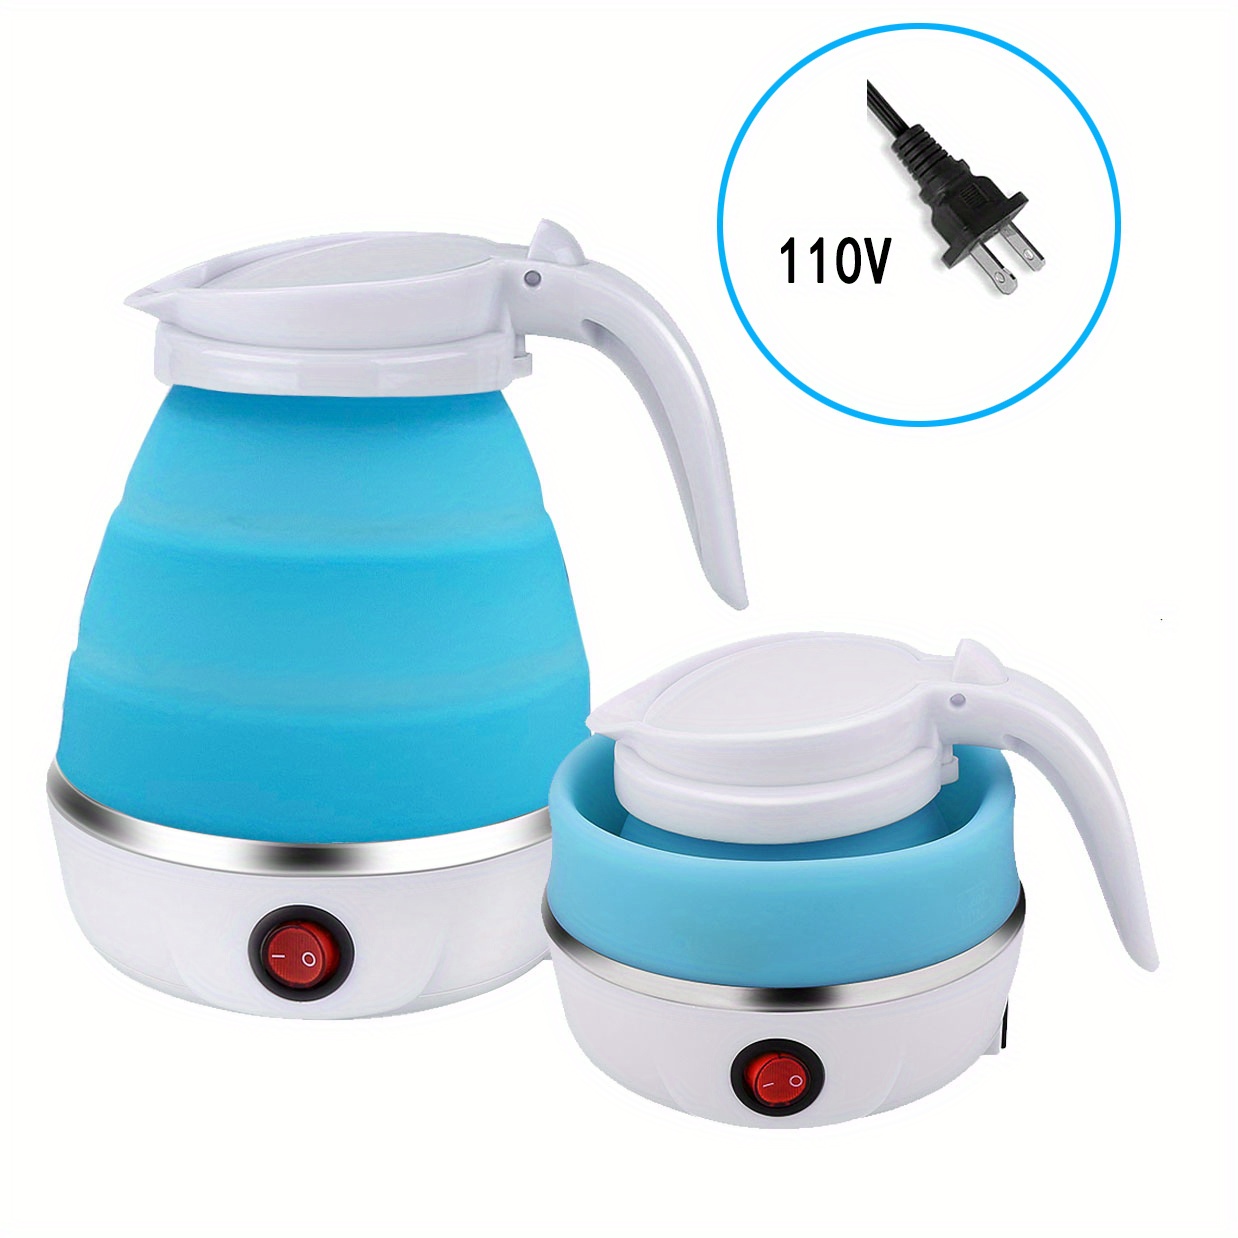 travel folding electric kettle portable upgraded food grade silicone 304 stainless steel heating base 600ml kettle 5 minute rapid boiling convenient storage detachable power cord 110v blue white pink details 6